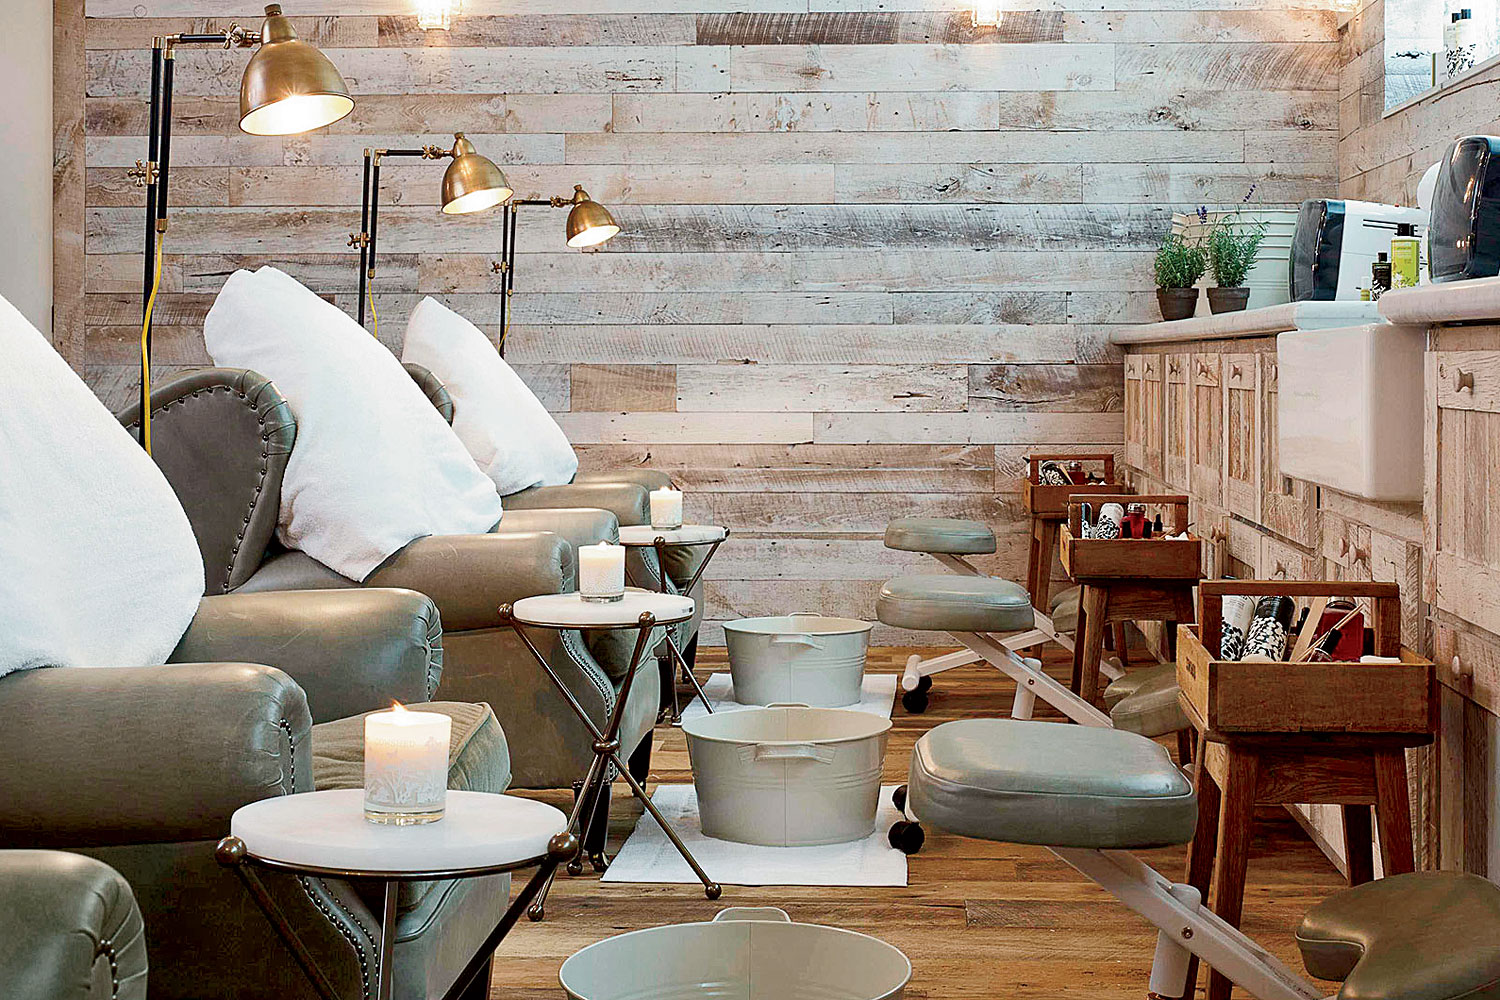 Cowshed Spa at Soho House – Chicago Magazine